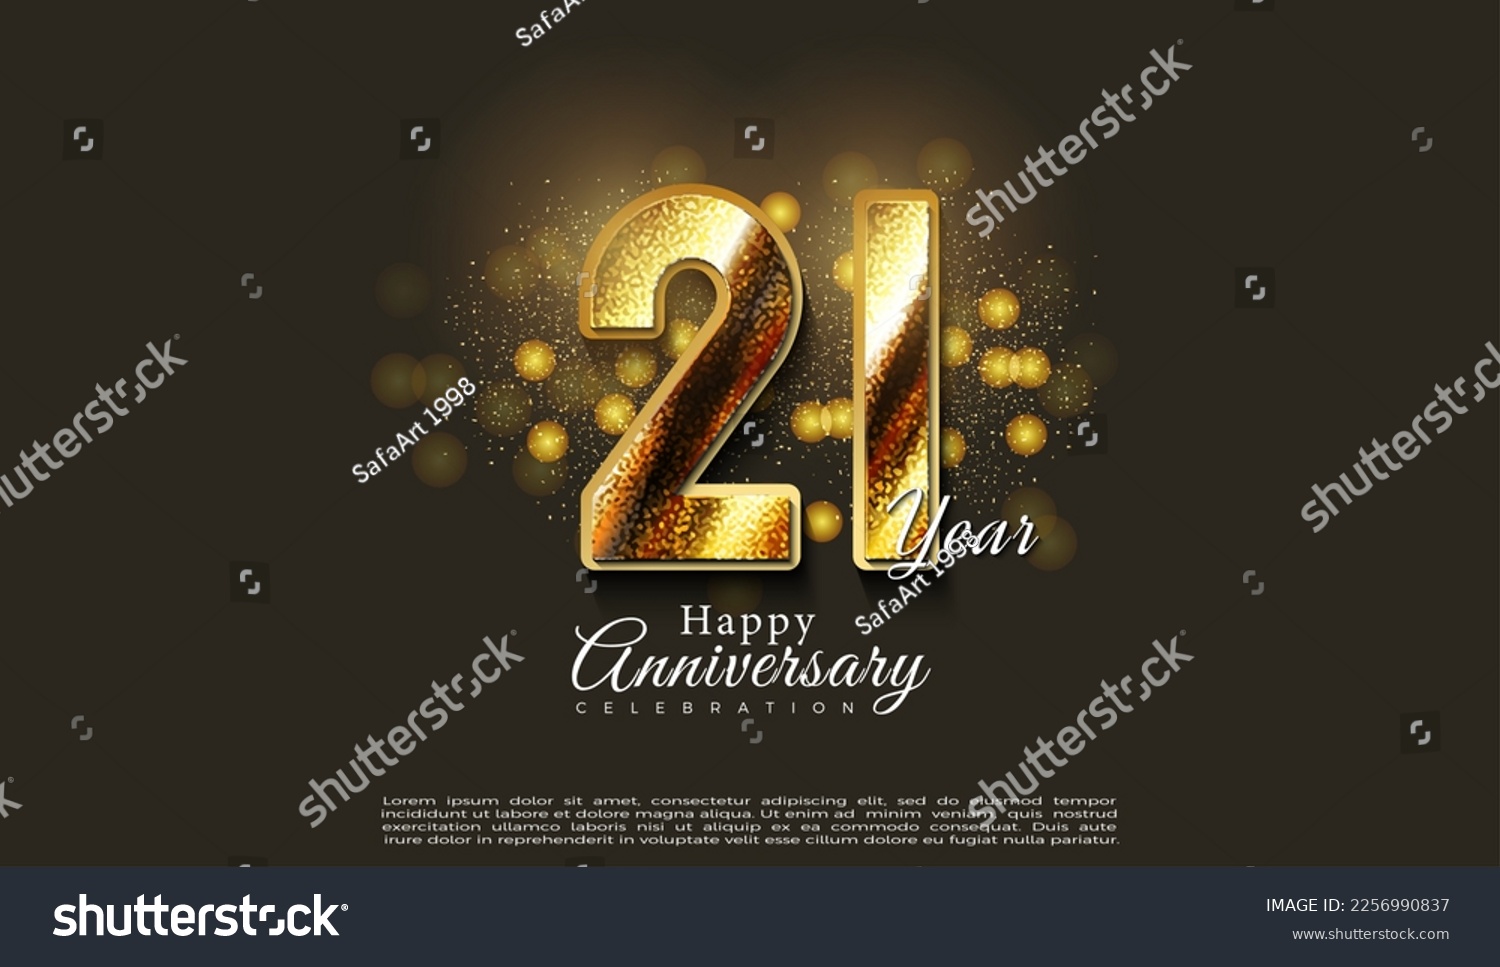 SVG of 21st anniversary with dark background and shiny bubbles. svg